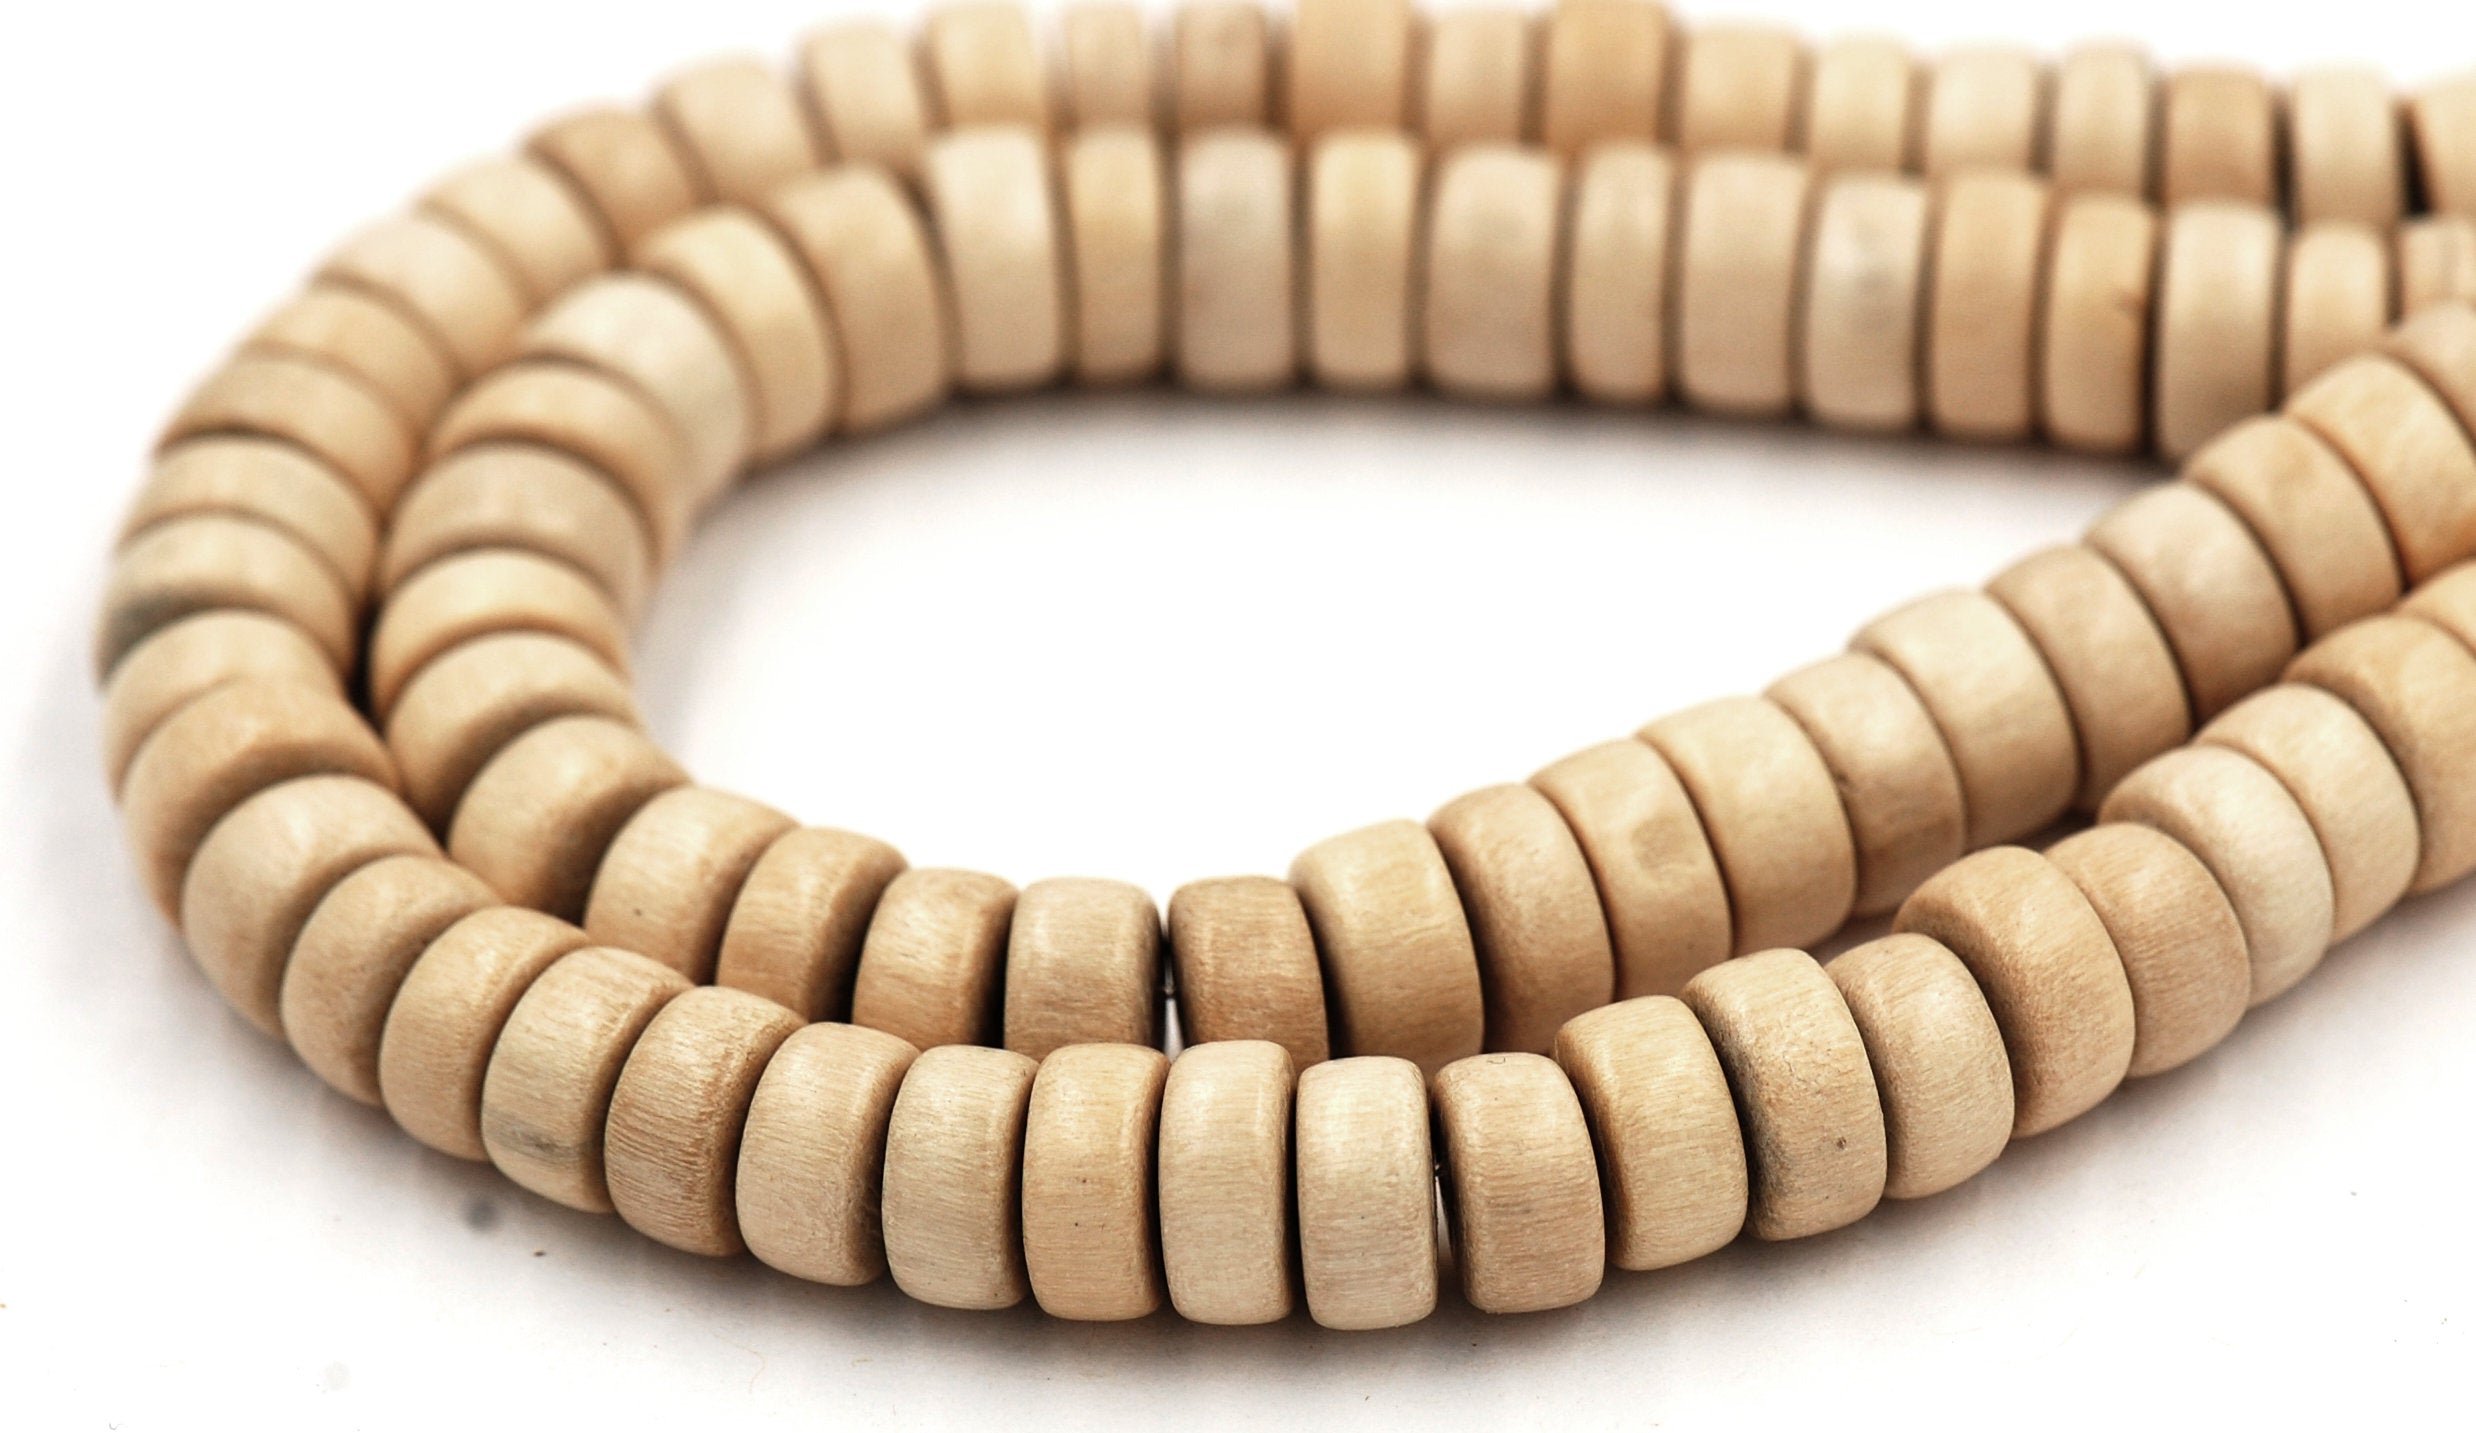 Whitewood Beads 4mm 6mm, 8mm, 10mm, 12mm, 16mm Round natural Whitewood Rondelle beads -16 inch strand